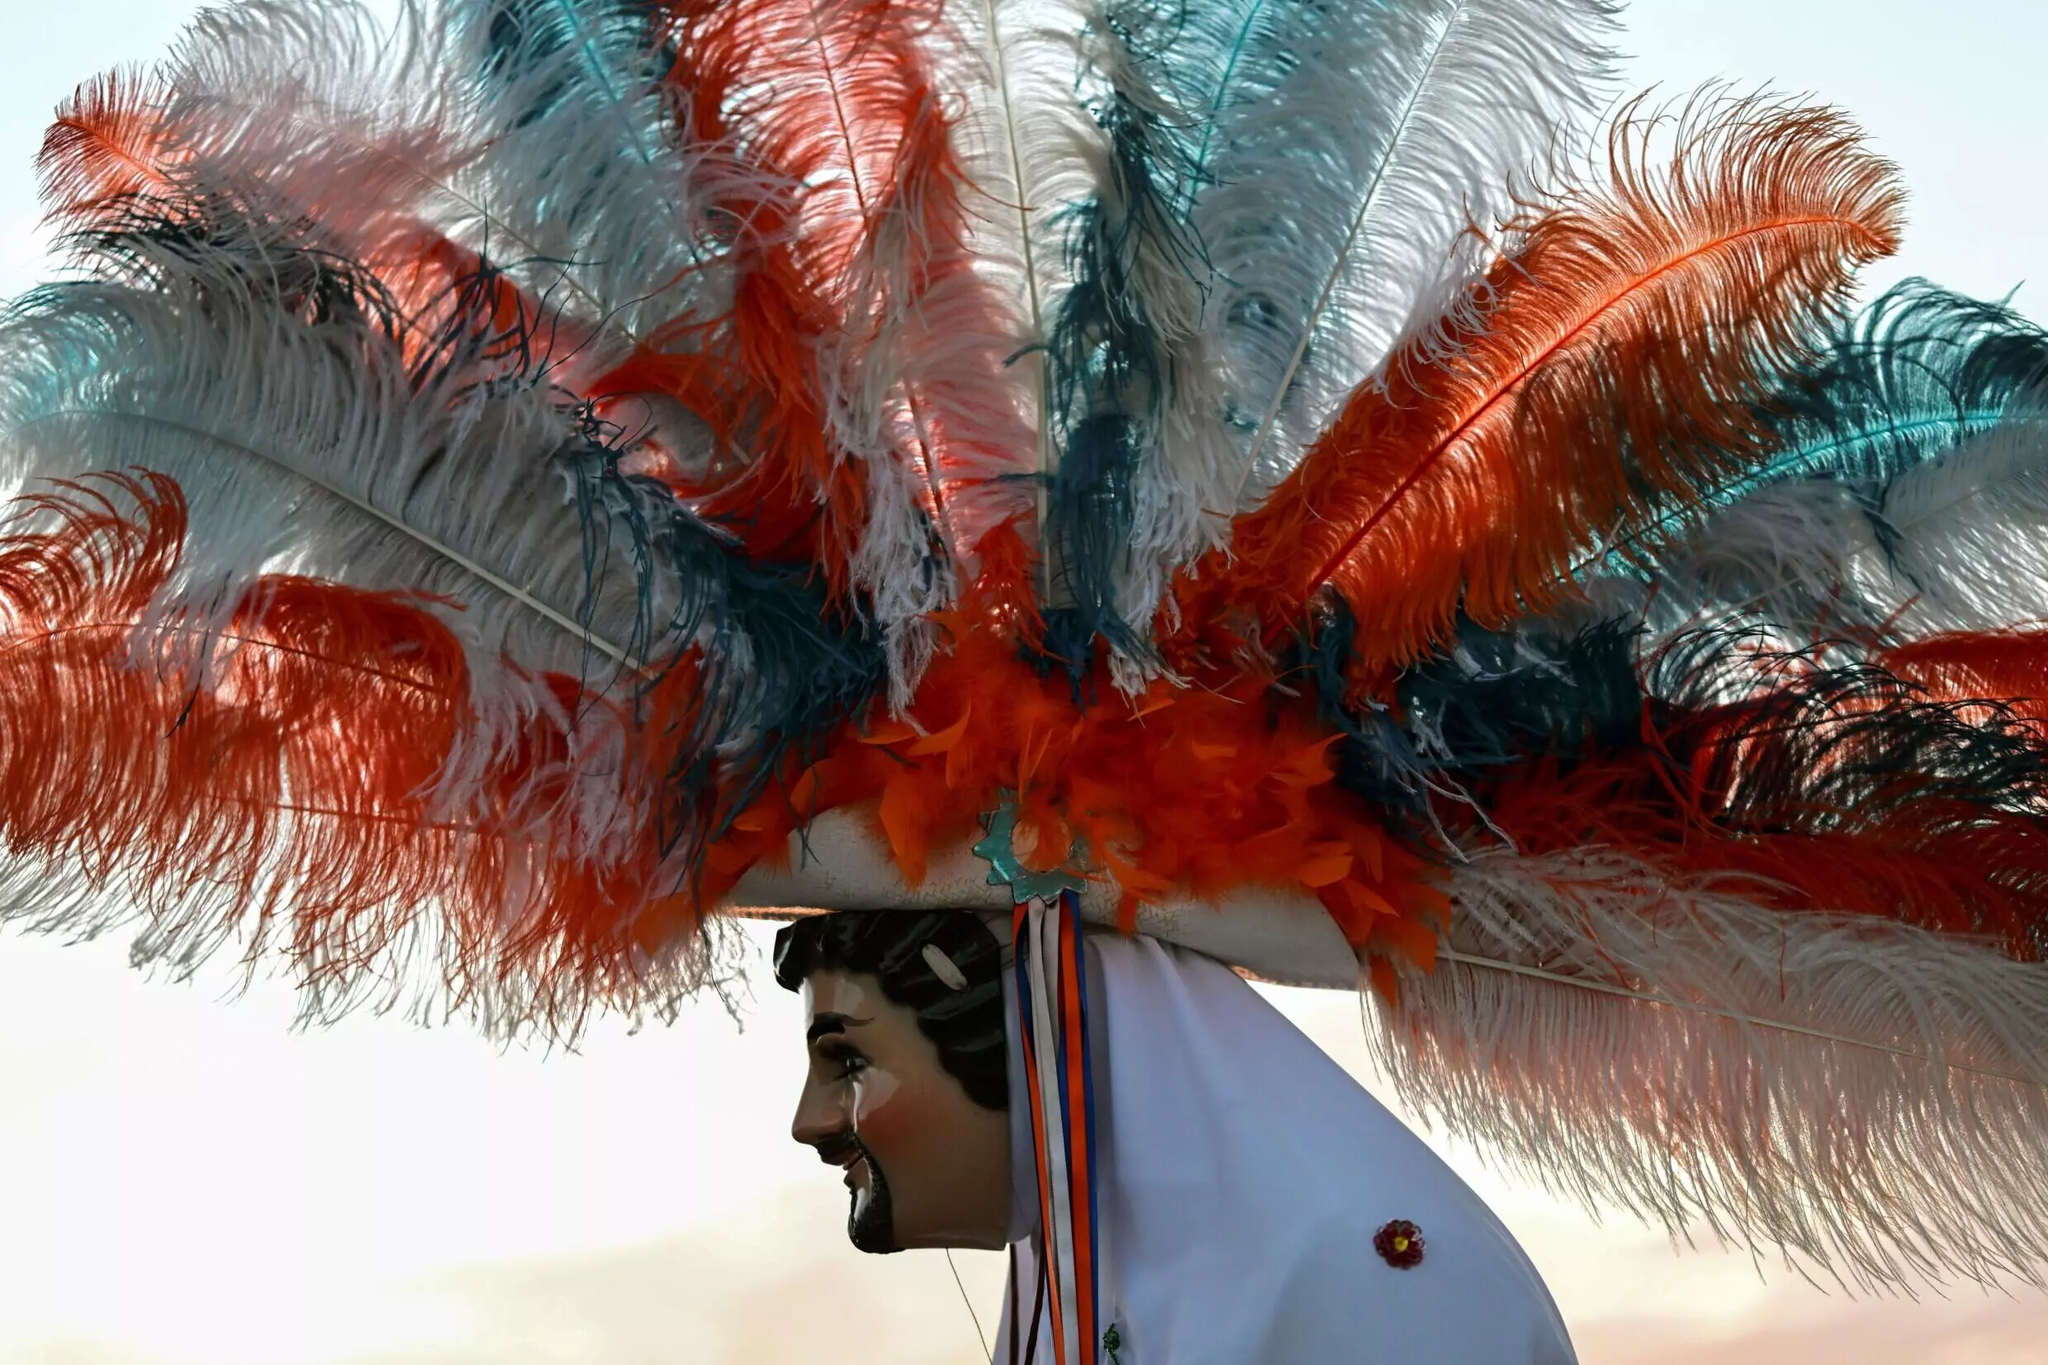 The carnival's costumes and dances have become a fusion of Mexican and European cultures. Photo: AFP